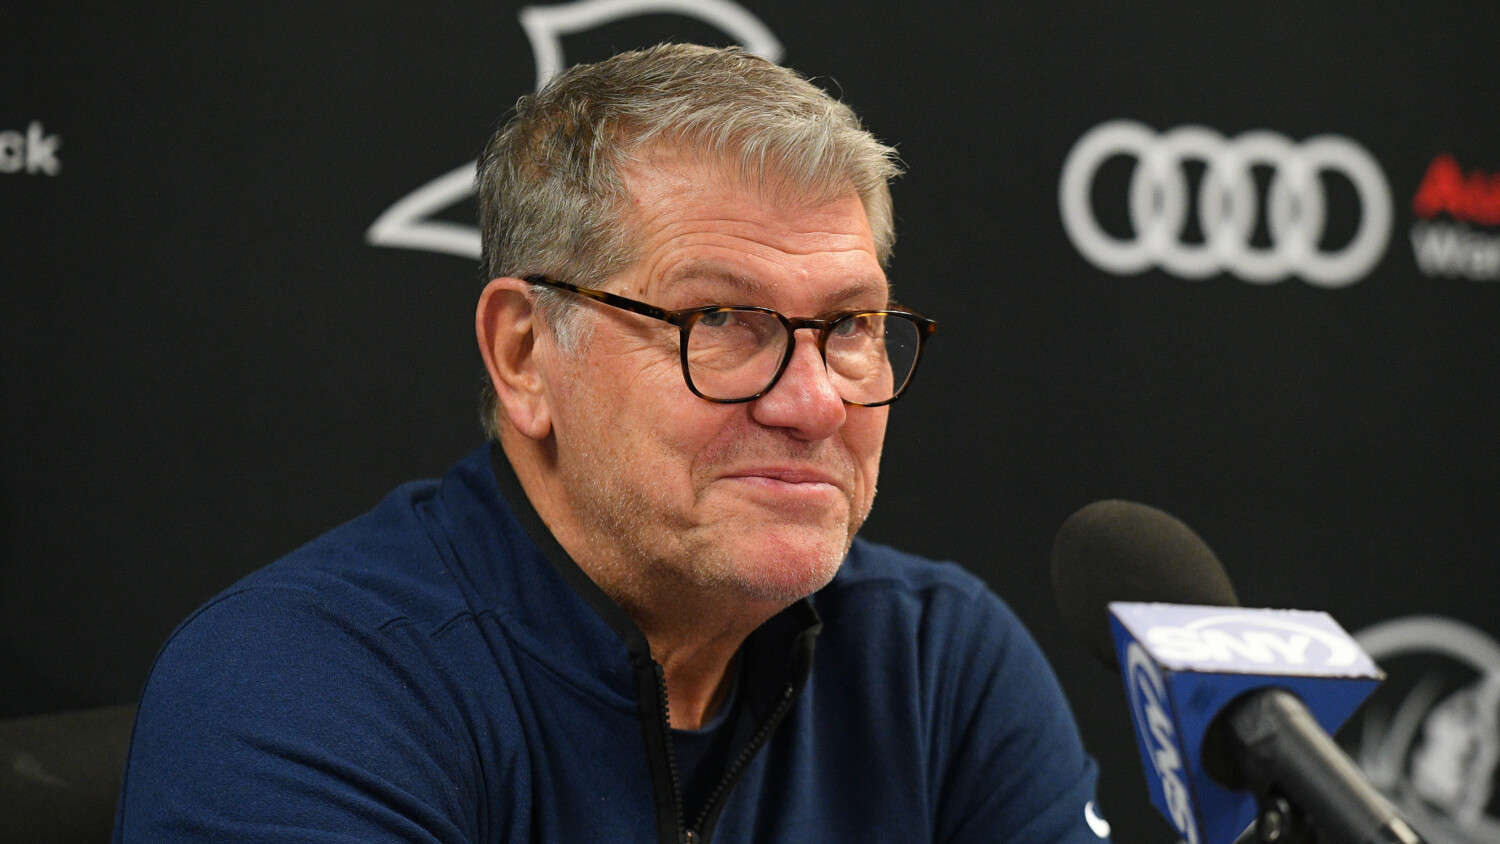 Geno Auriemma Contract & Salary Details at UConn - Boardroom